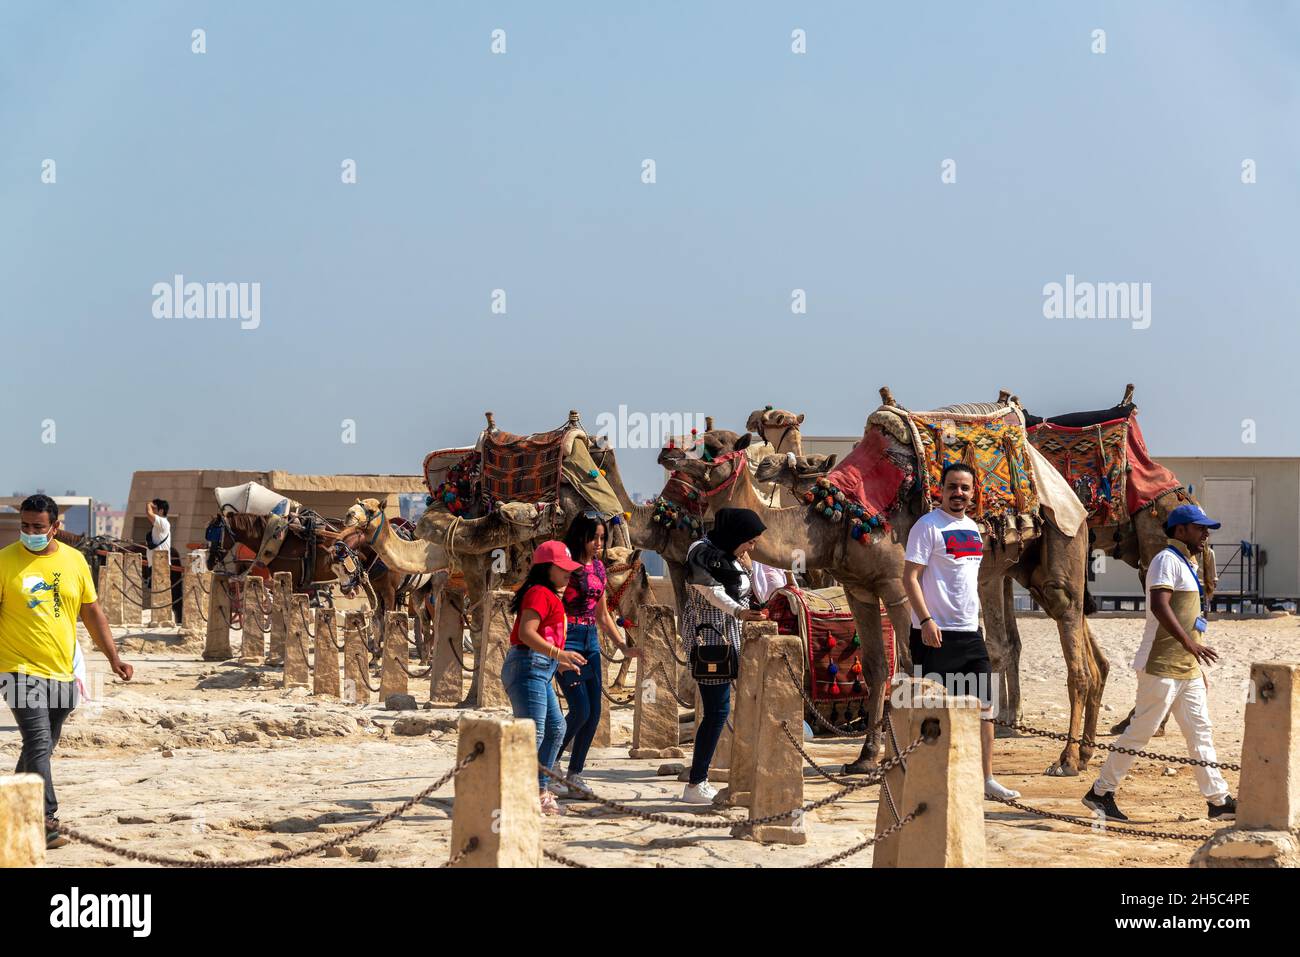 GIZA, EGYPT - JULY 14, 2021: A group of people and camels near the Great Pyramid in Giza, Egypt Stock Photo